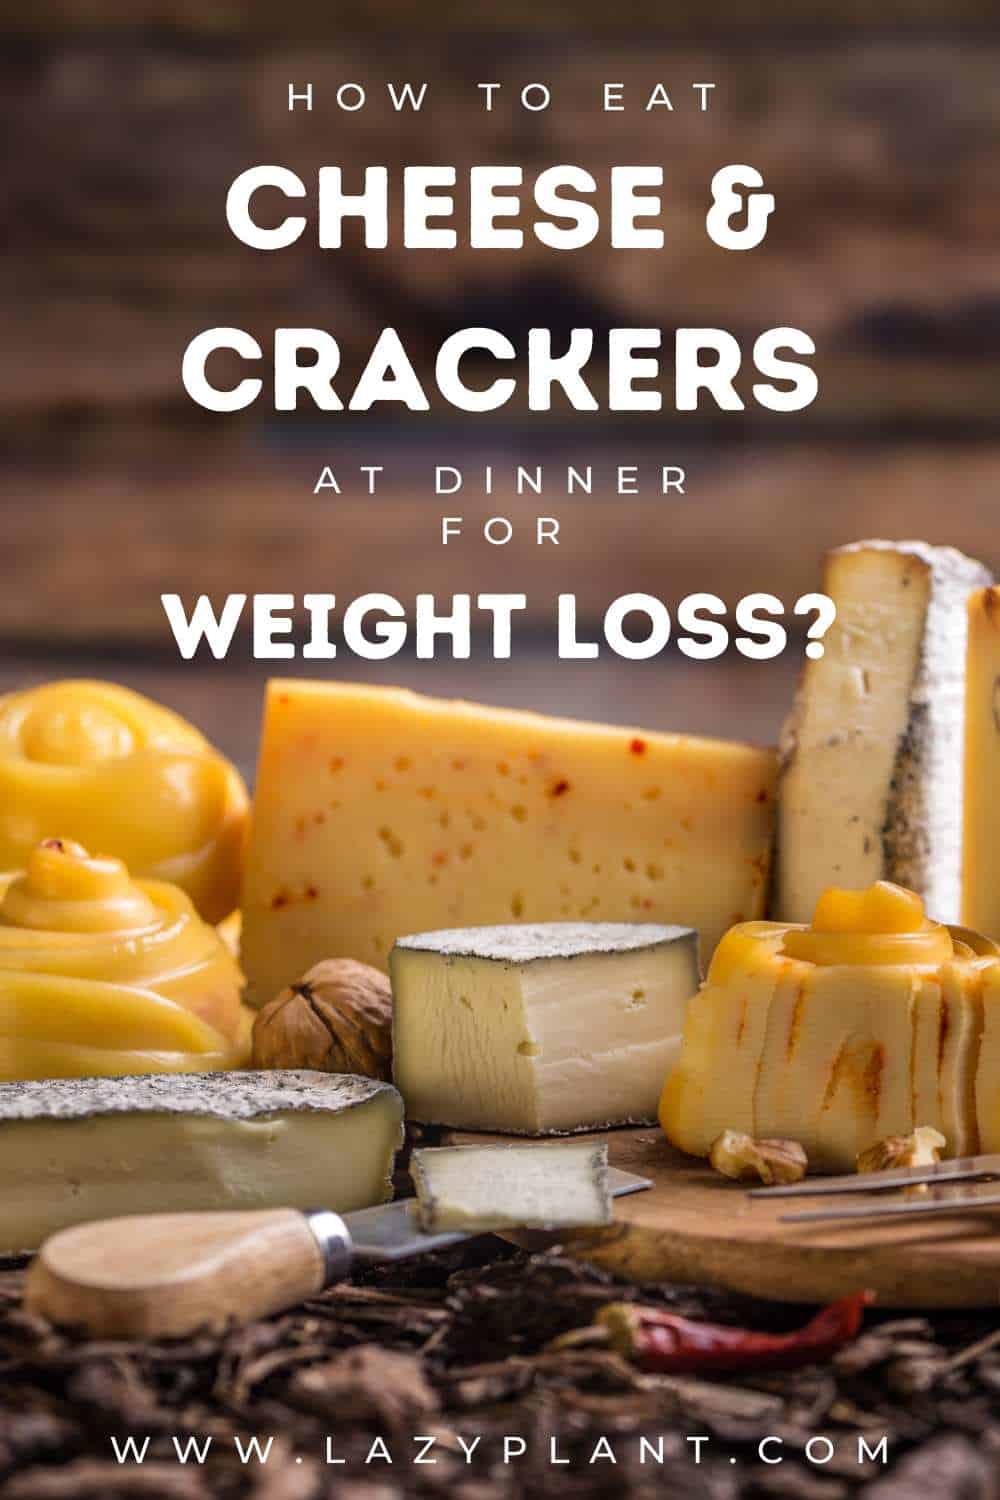 Does eating cheese and crackers before bed make me fat?